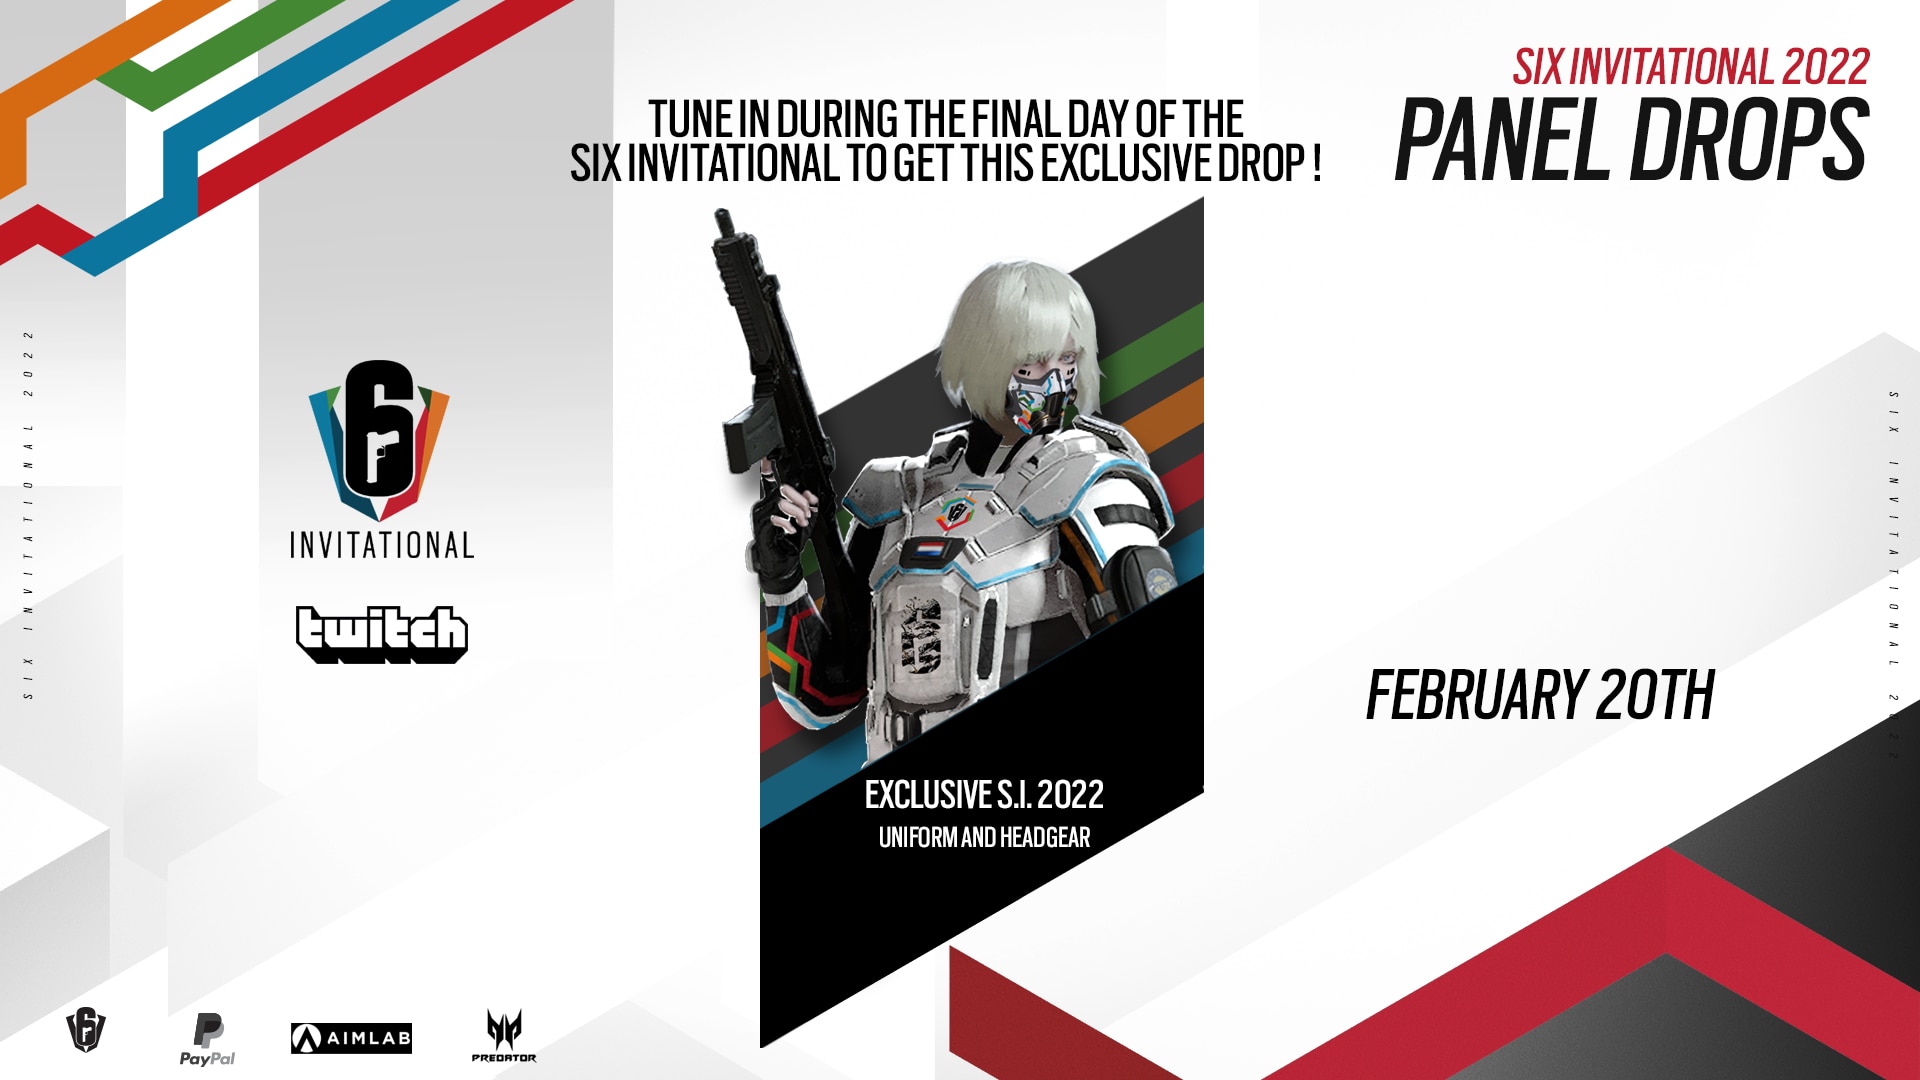 [R6SE] - Introducing the Twitch Drops Program for the Six Invitational 2022 - Iana esports drops